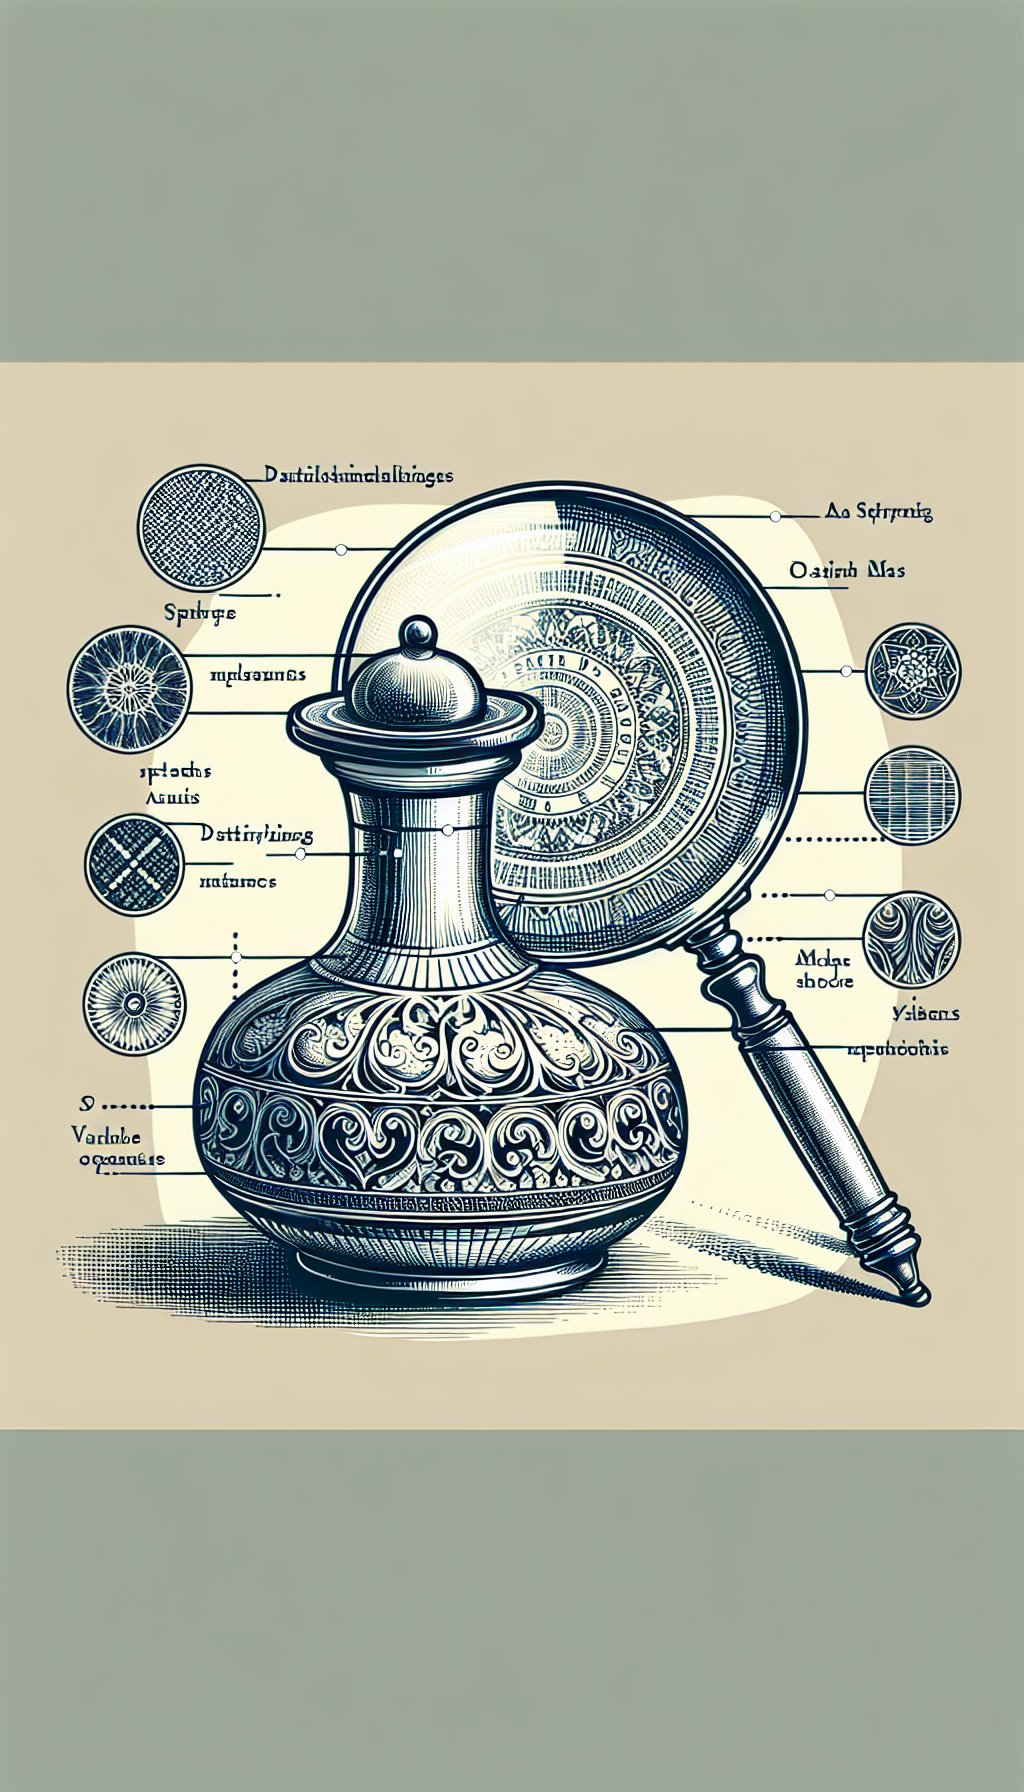 An illustration displays a Sherlock Holmes-inspired magnifying glass hovering over an intricately designed antique glass decanter. Inside the magnifying lens, detailed inscriptions and maker's marks come into crisp focus, symbolizing the precision of dating methodologies, while the varying opacity and stylized patterns outside the lens hint at the mysterious history of the decanter's origins.